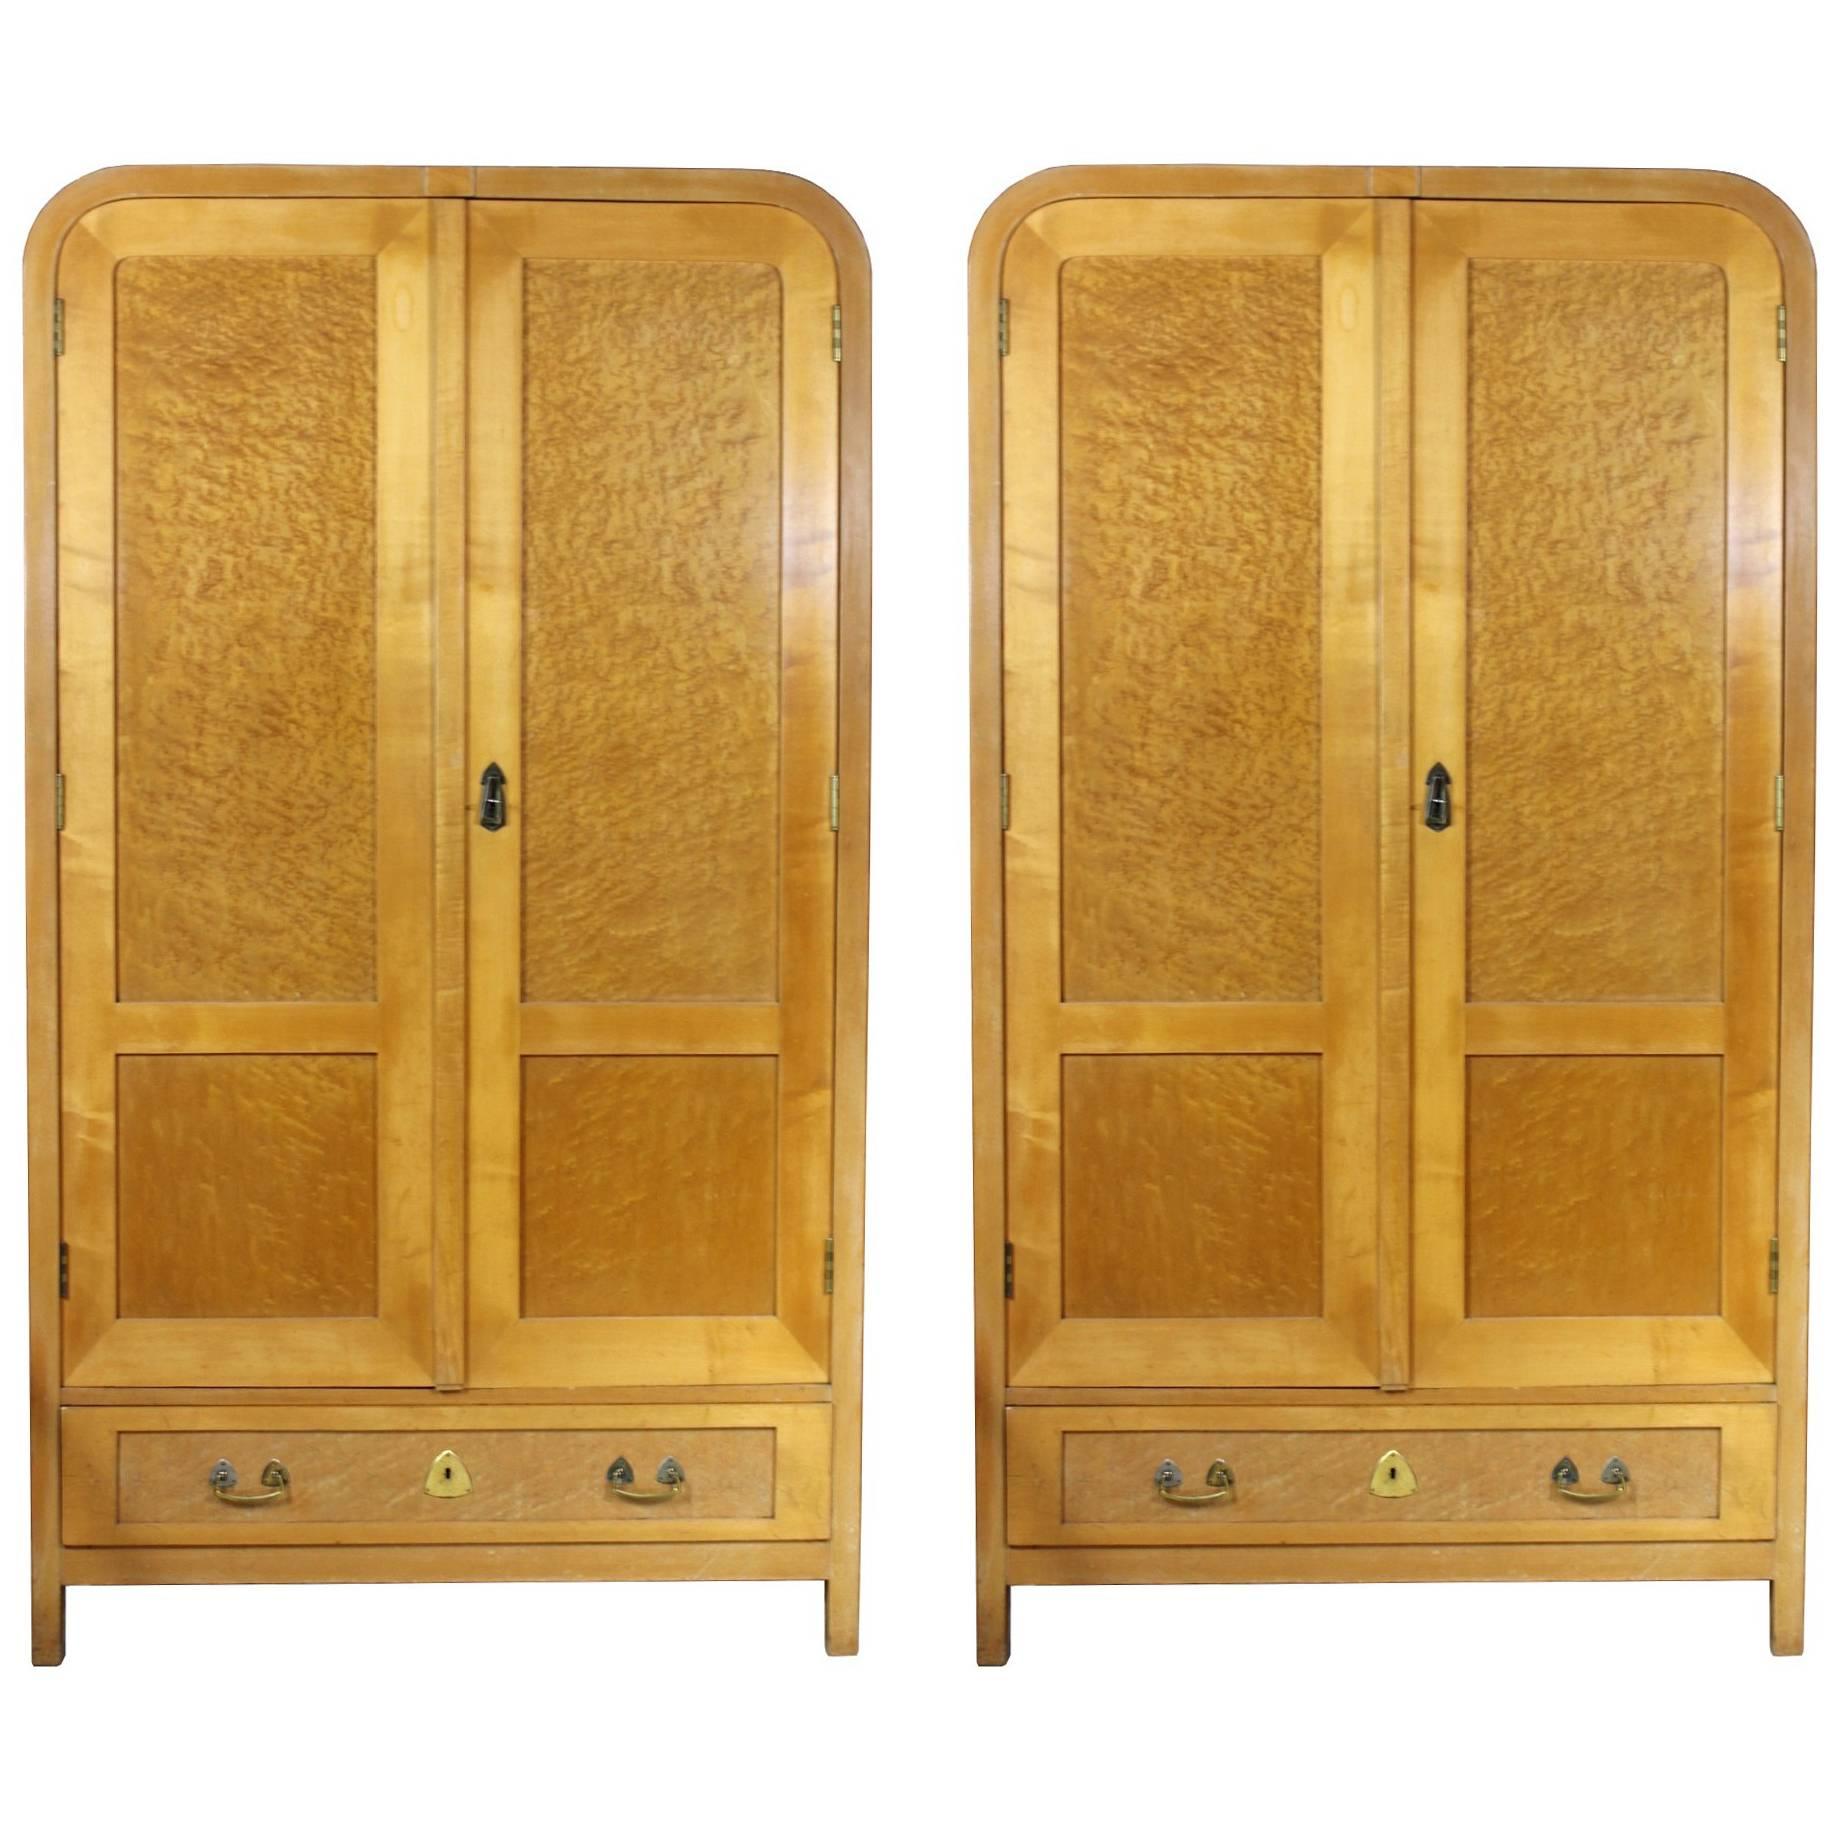 Bent Beechwood Wardrobe from Thonet, 2 pieces available